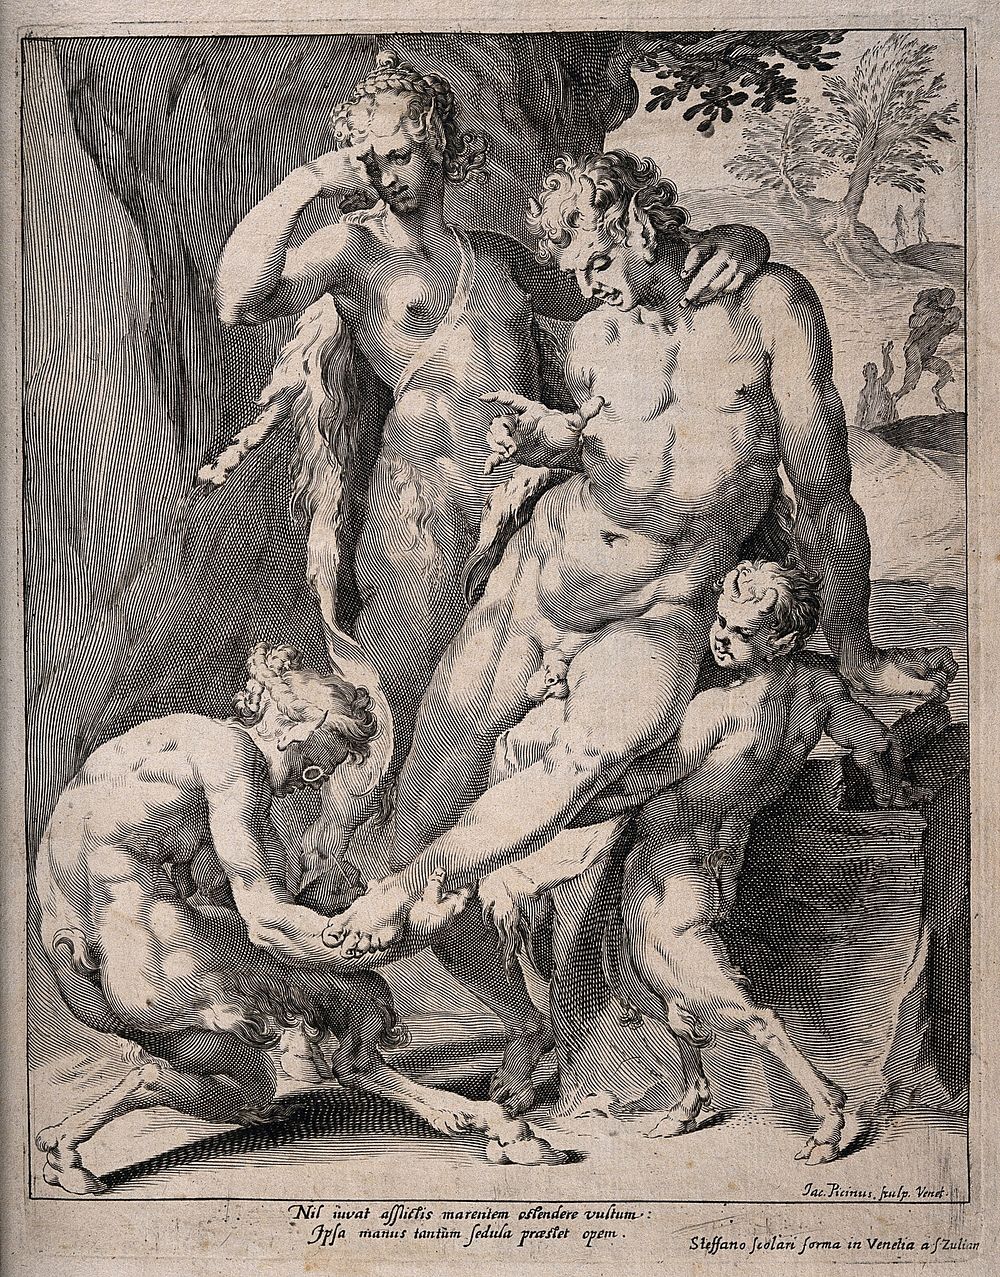 A satyr wearing spectacles removes a thorn from the foot of a male faun while a female faun and boy satyr observe, with…